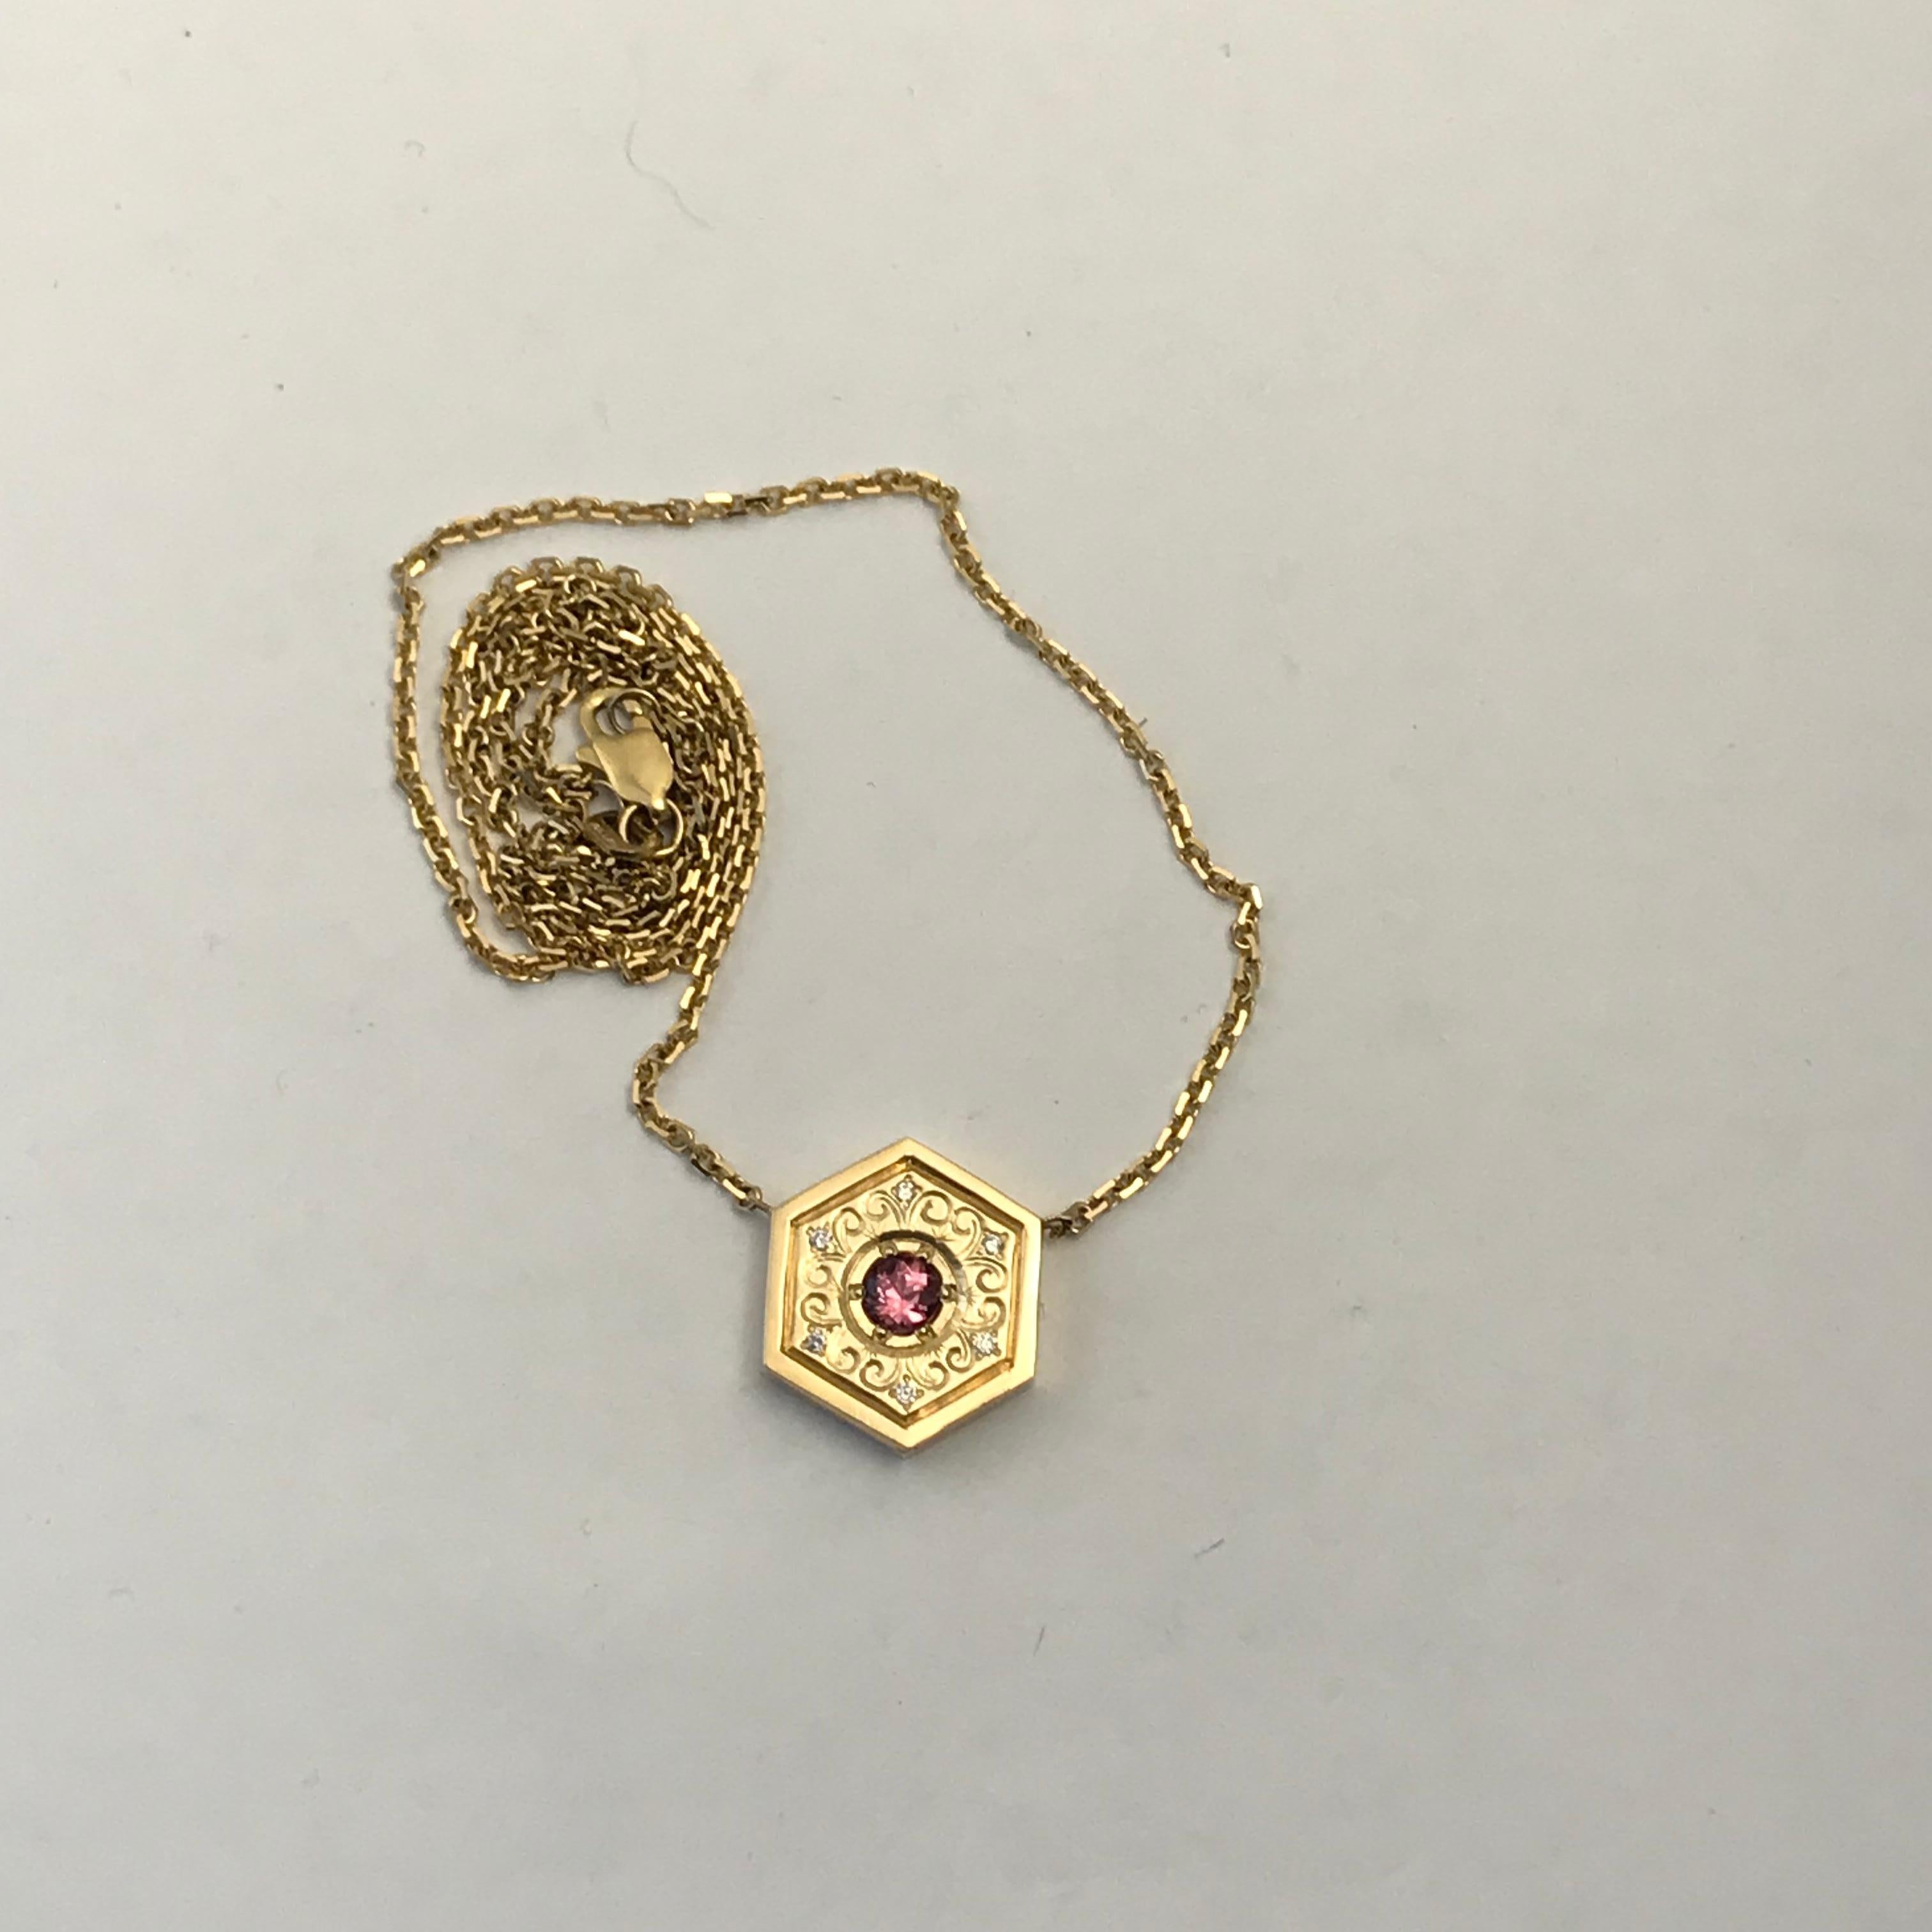 Hexagon Necklace in 14 Karat Gold and Gems-Pink Sapphire Flower For Sale 1